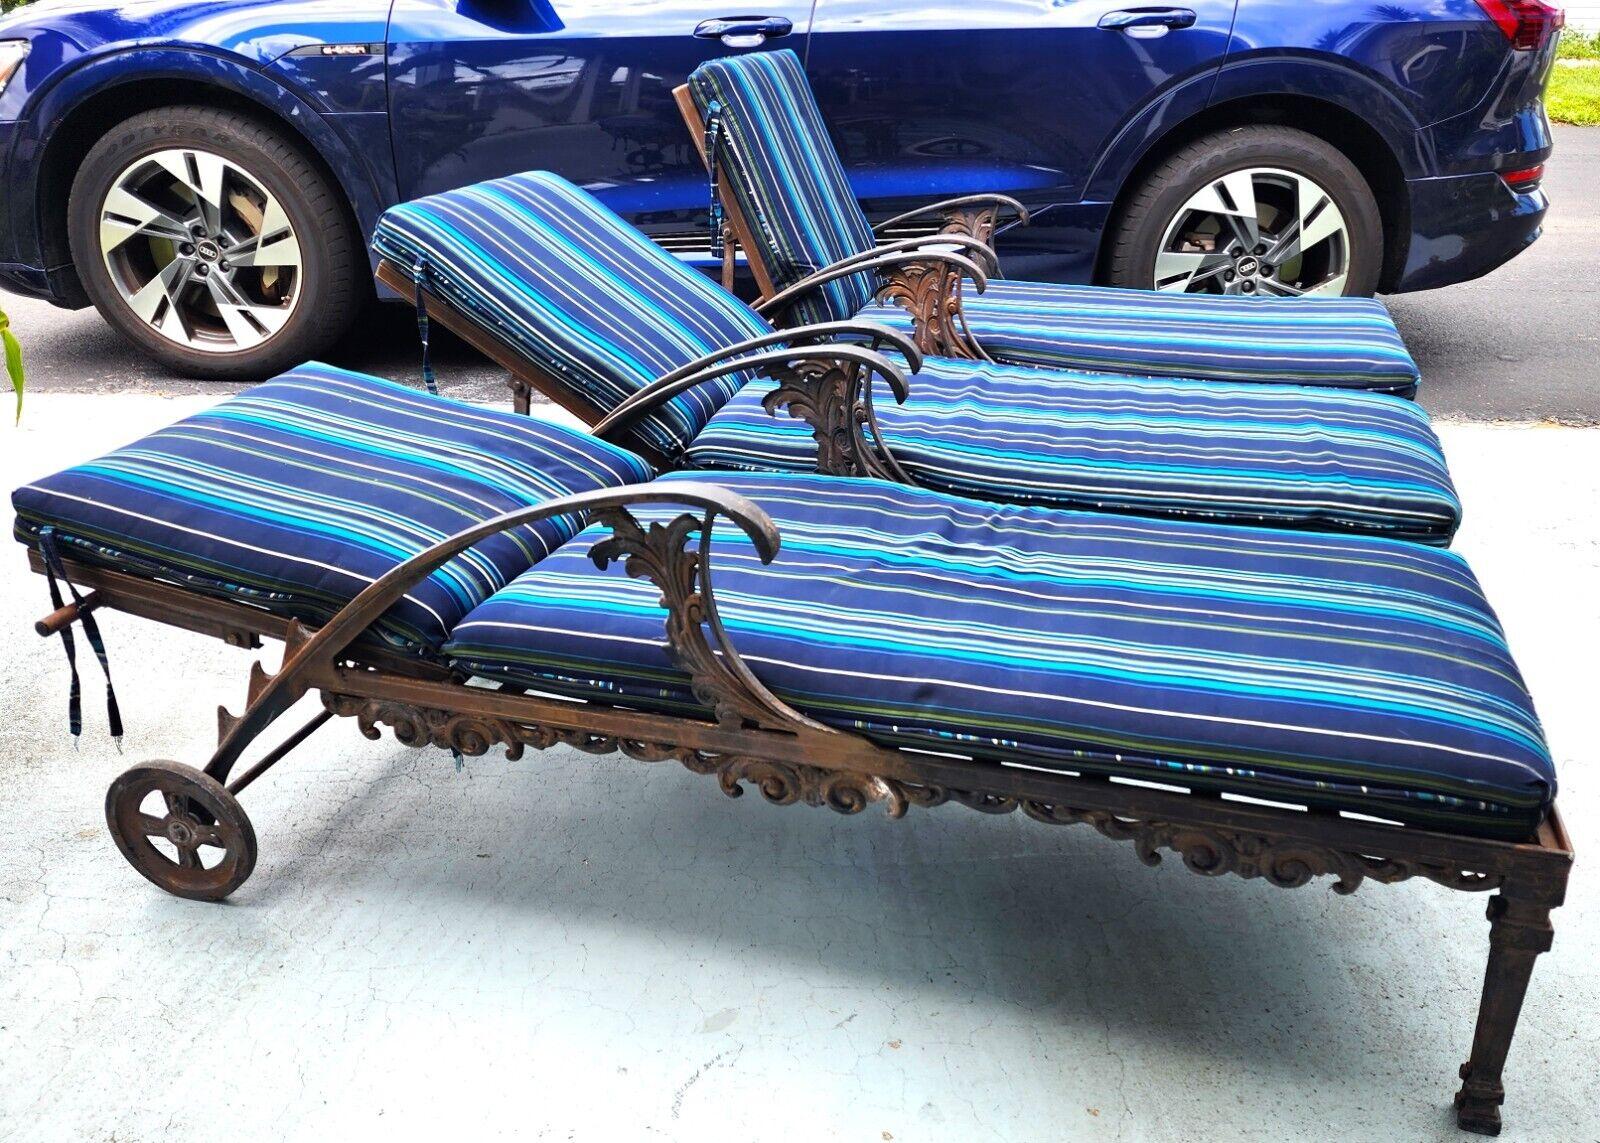 Vintage Chaise Lounges Outdoor Ornate Rustproof In Good Condition For Sale In Lake Worth, FL